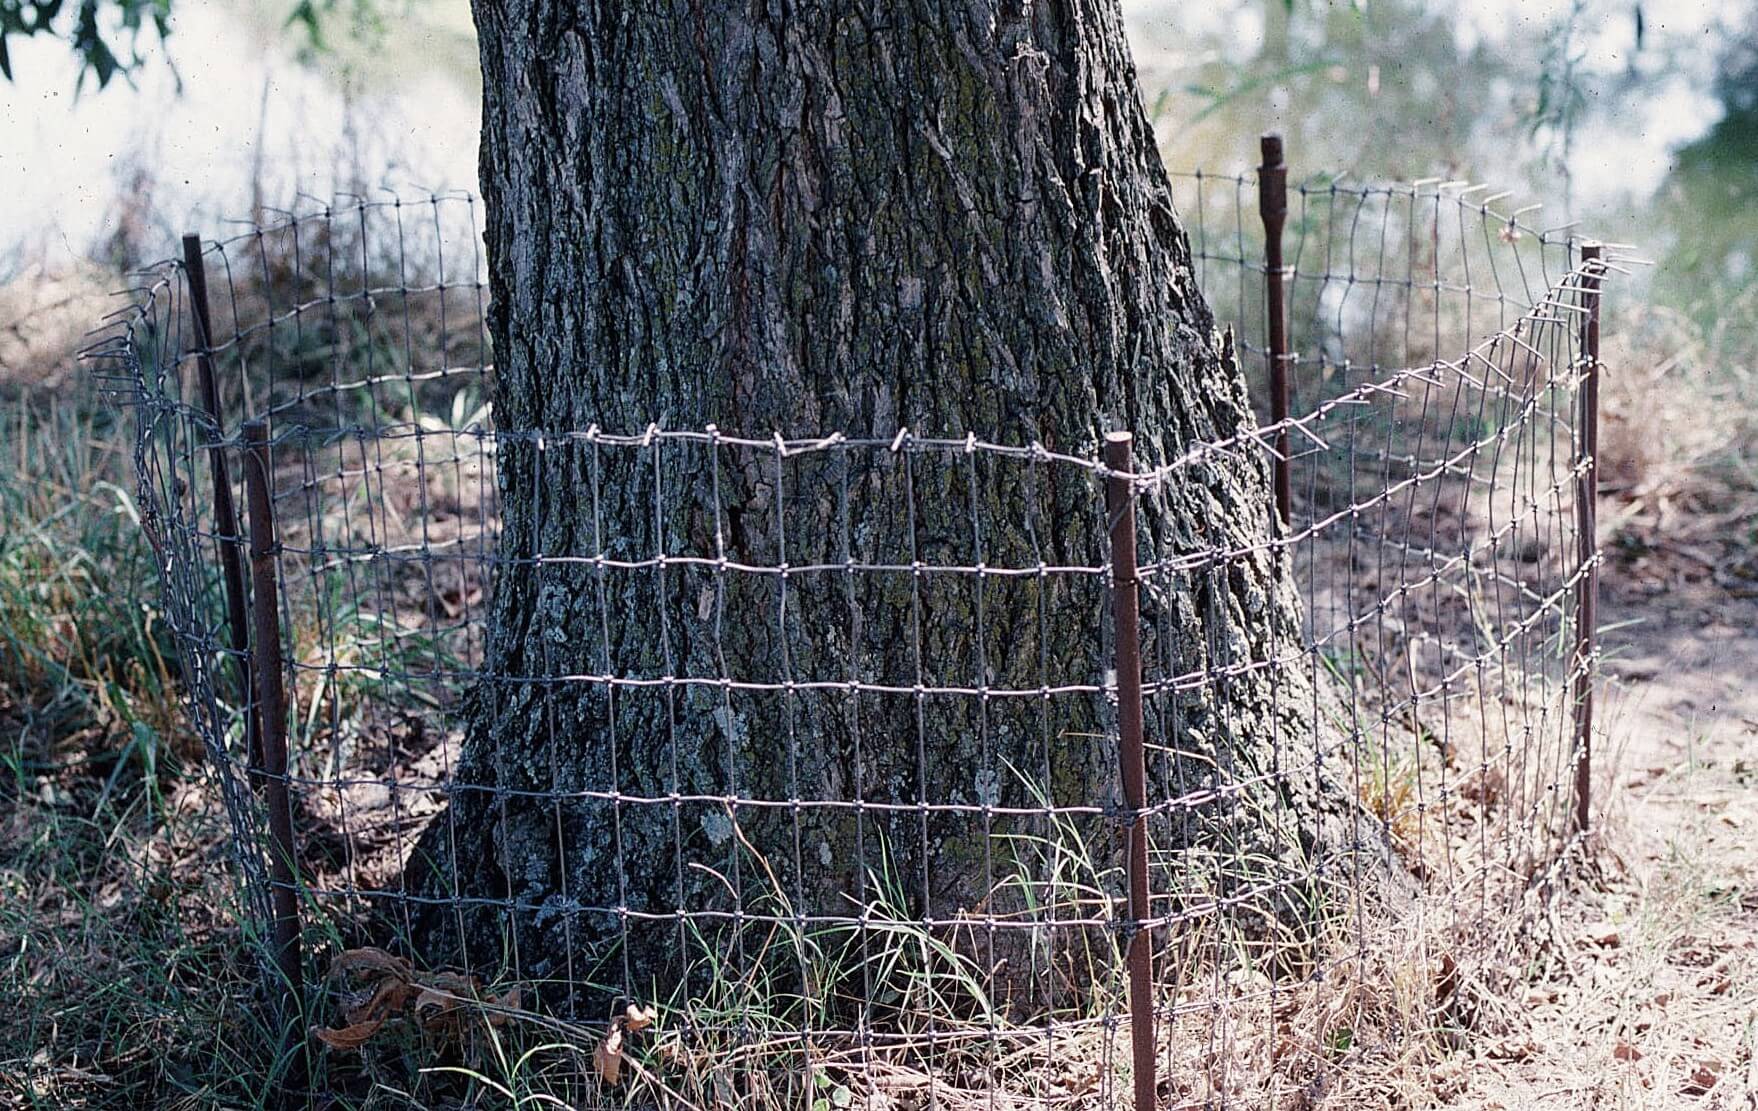 Figure 4. A 2-inch by 4-inch woven wire beaver
exclosure protecting a pecan tree at 2 NE Pond.